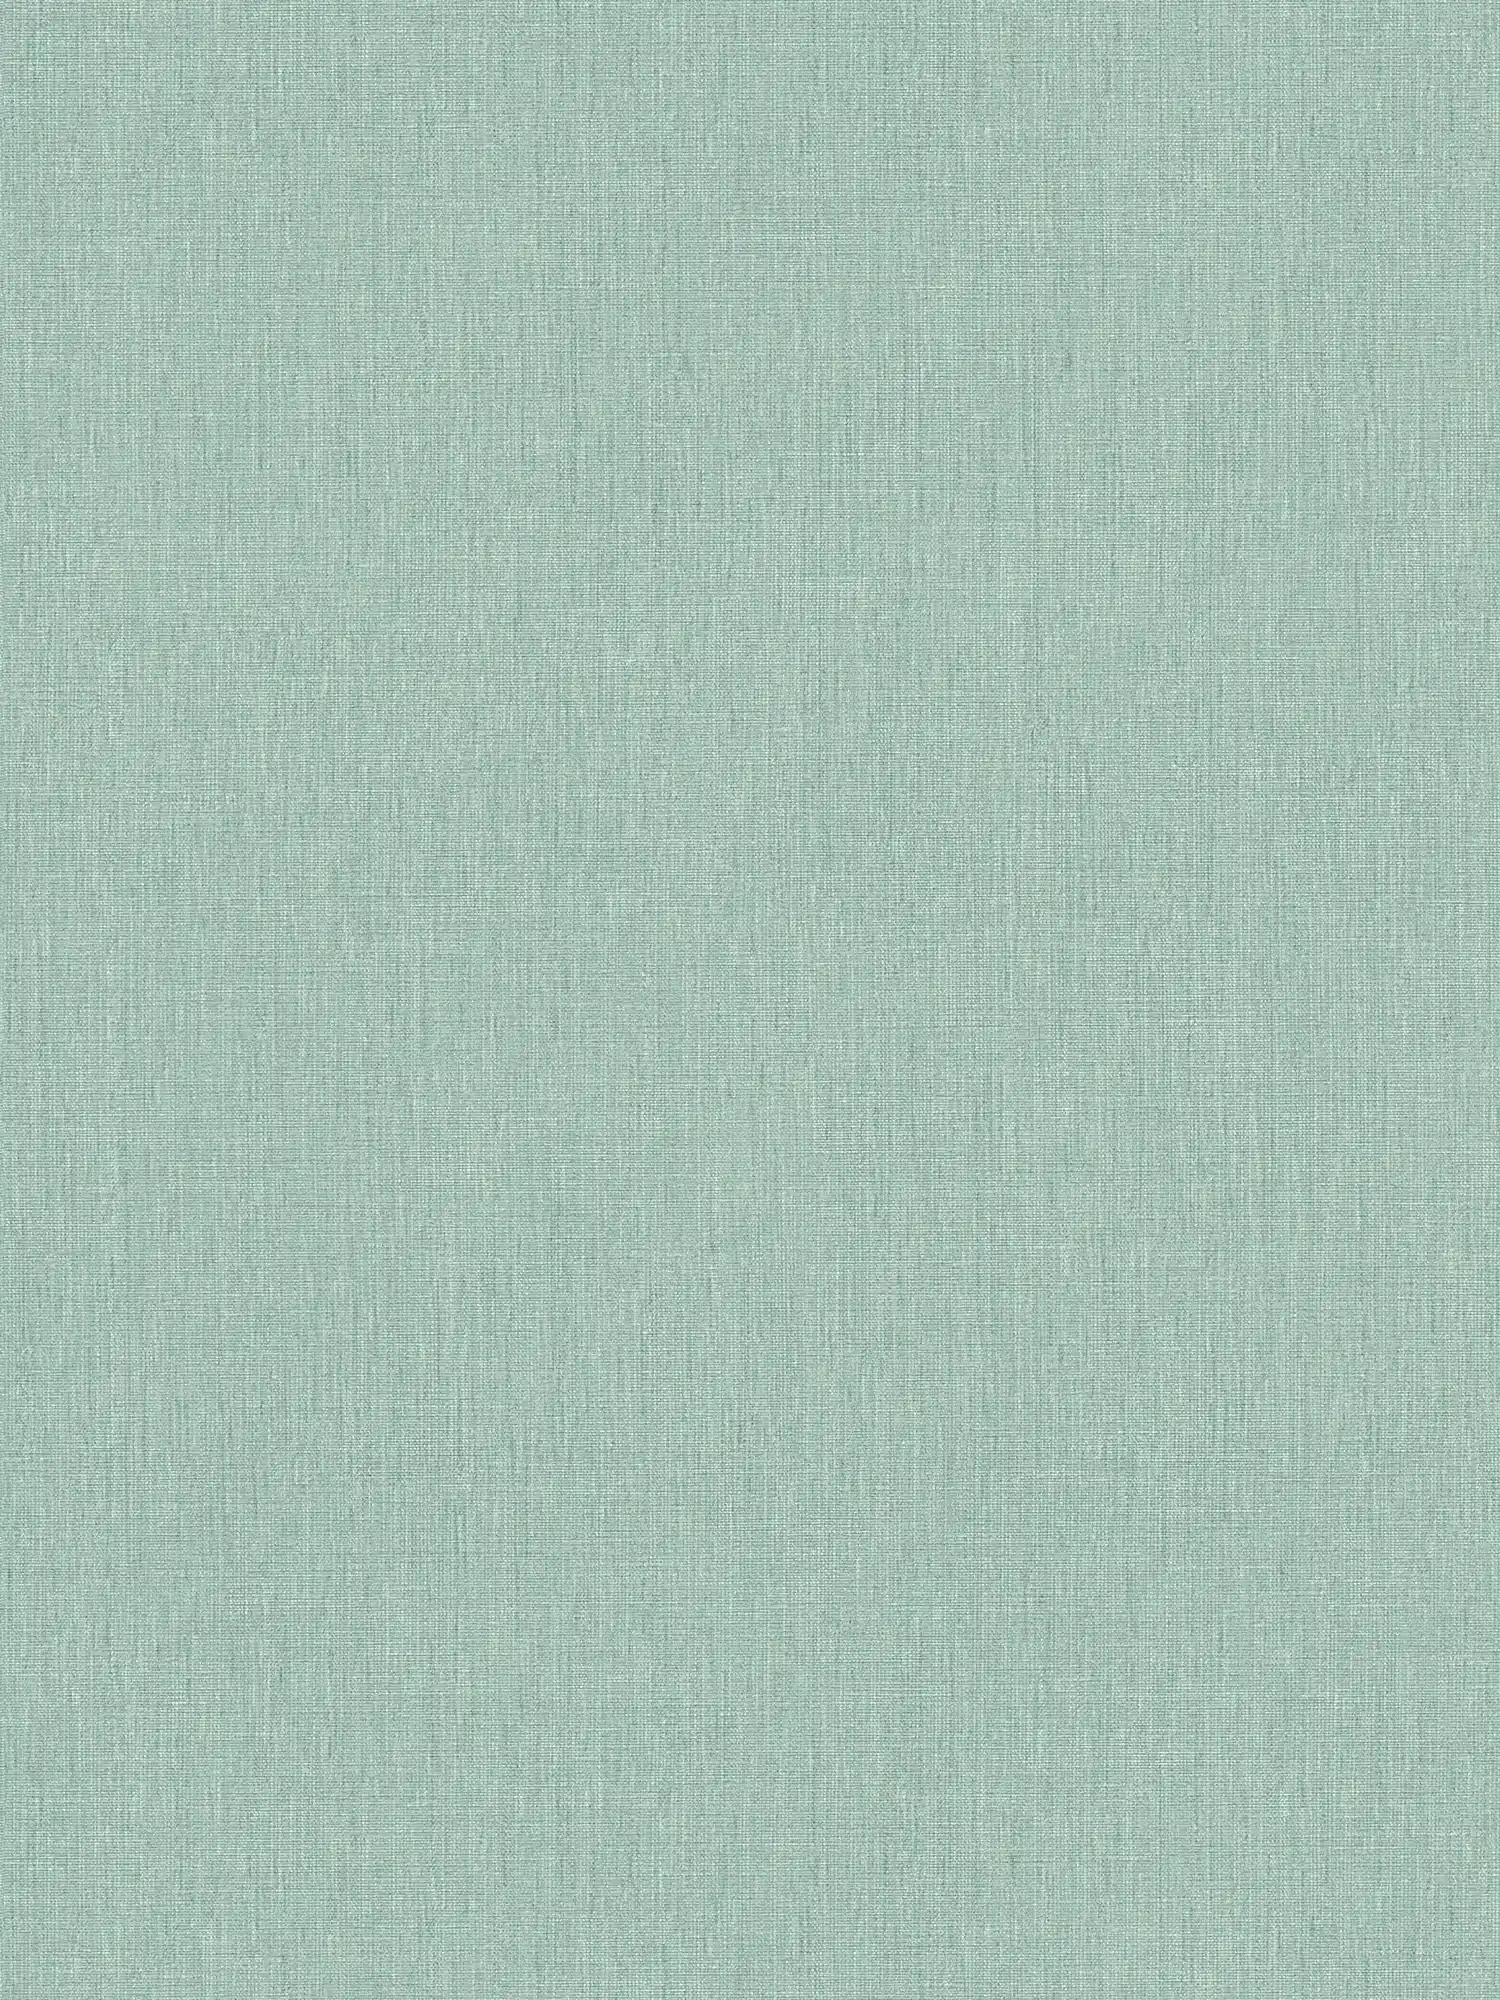 Plain wallpaper in textile look - green, turquoise, blue
